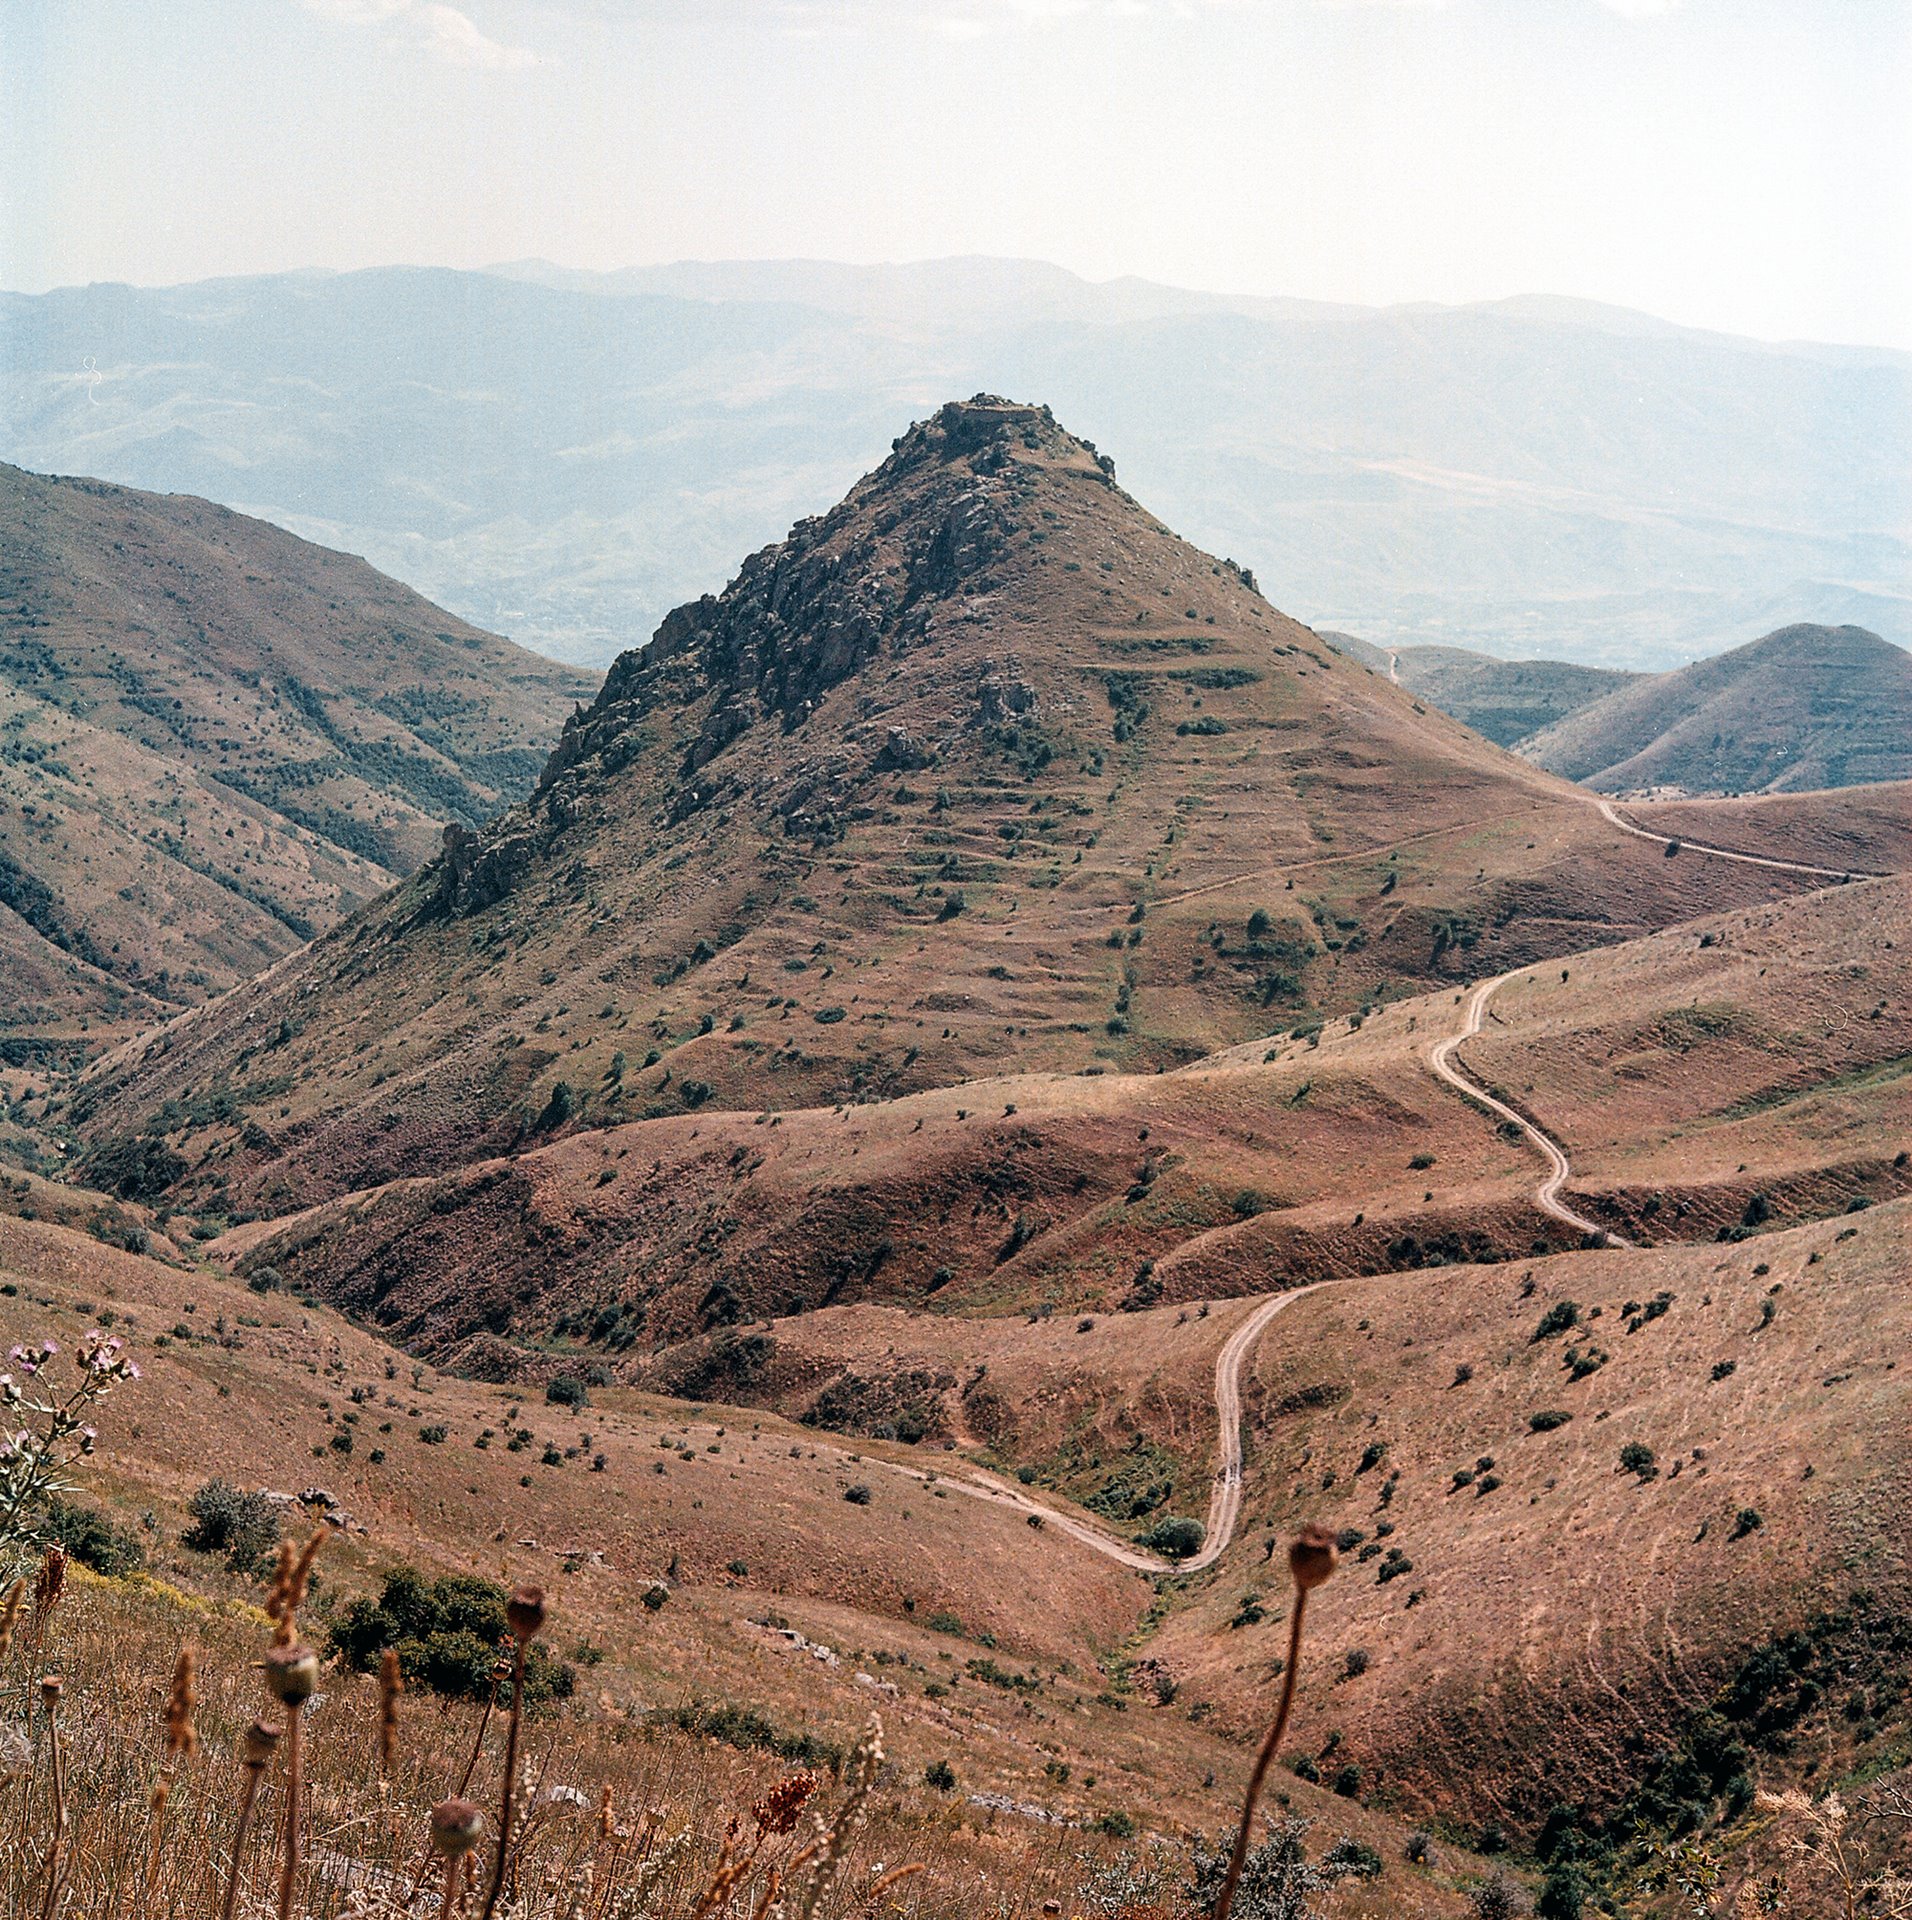 The mountains of Yeghegnadzor, Armenia, where Parkev Kazarian, friend and protégé of Rustam Effendi, tracked down <em>Satyrus effendi</em>, a rare butterfly native to the region named after the photographer&rsquo;s father.